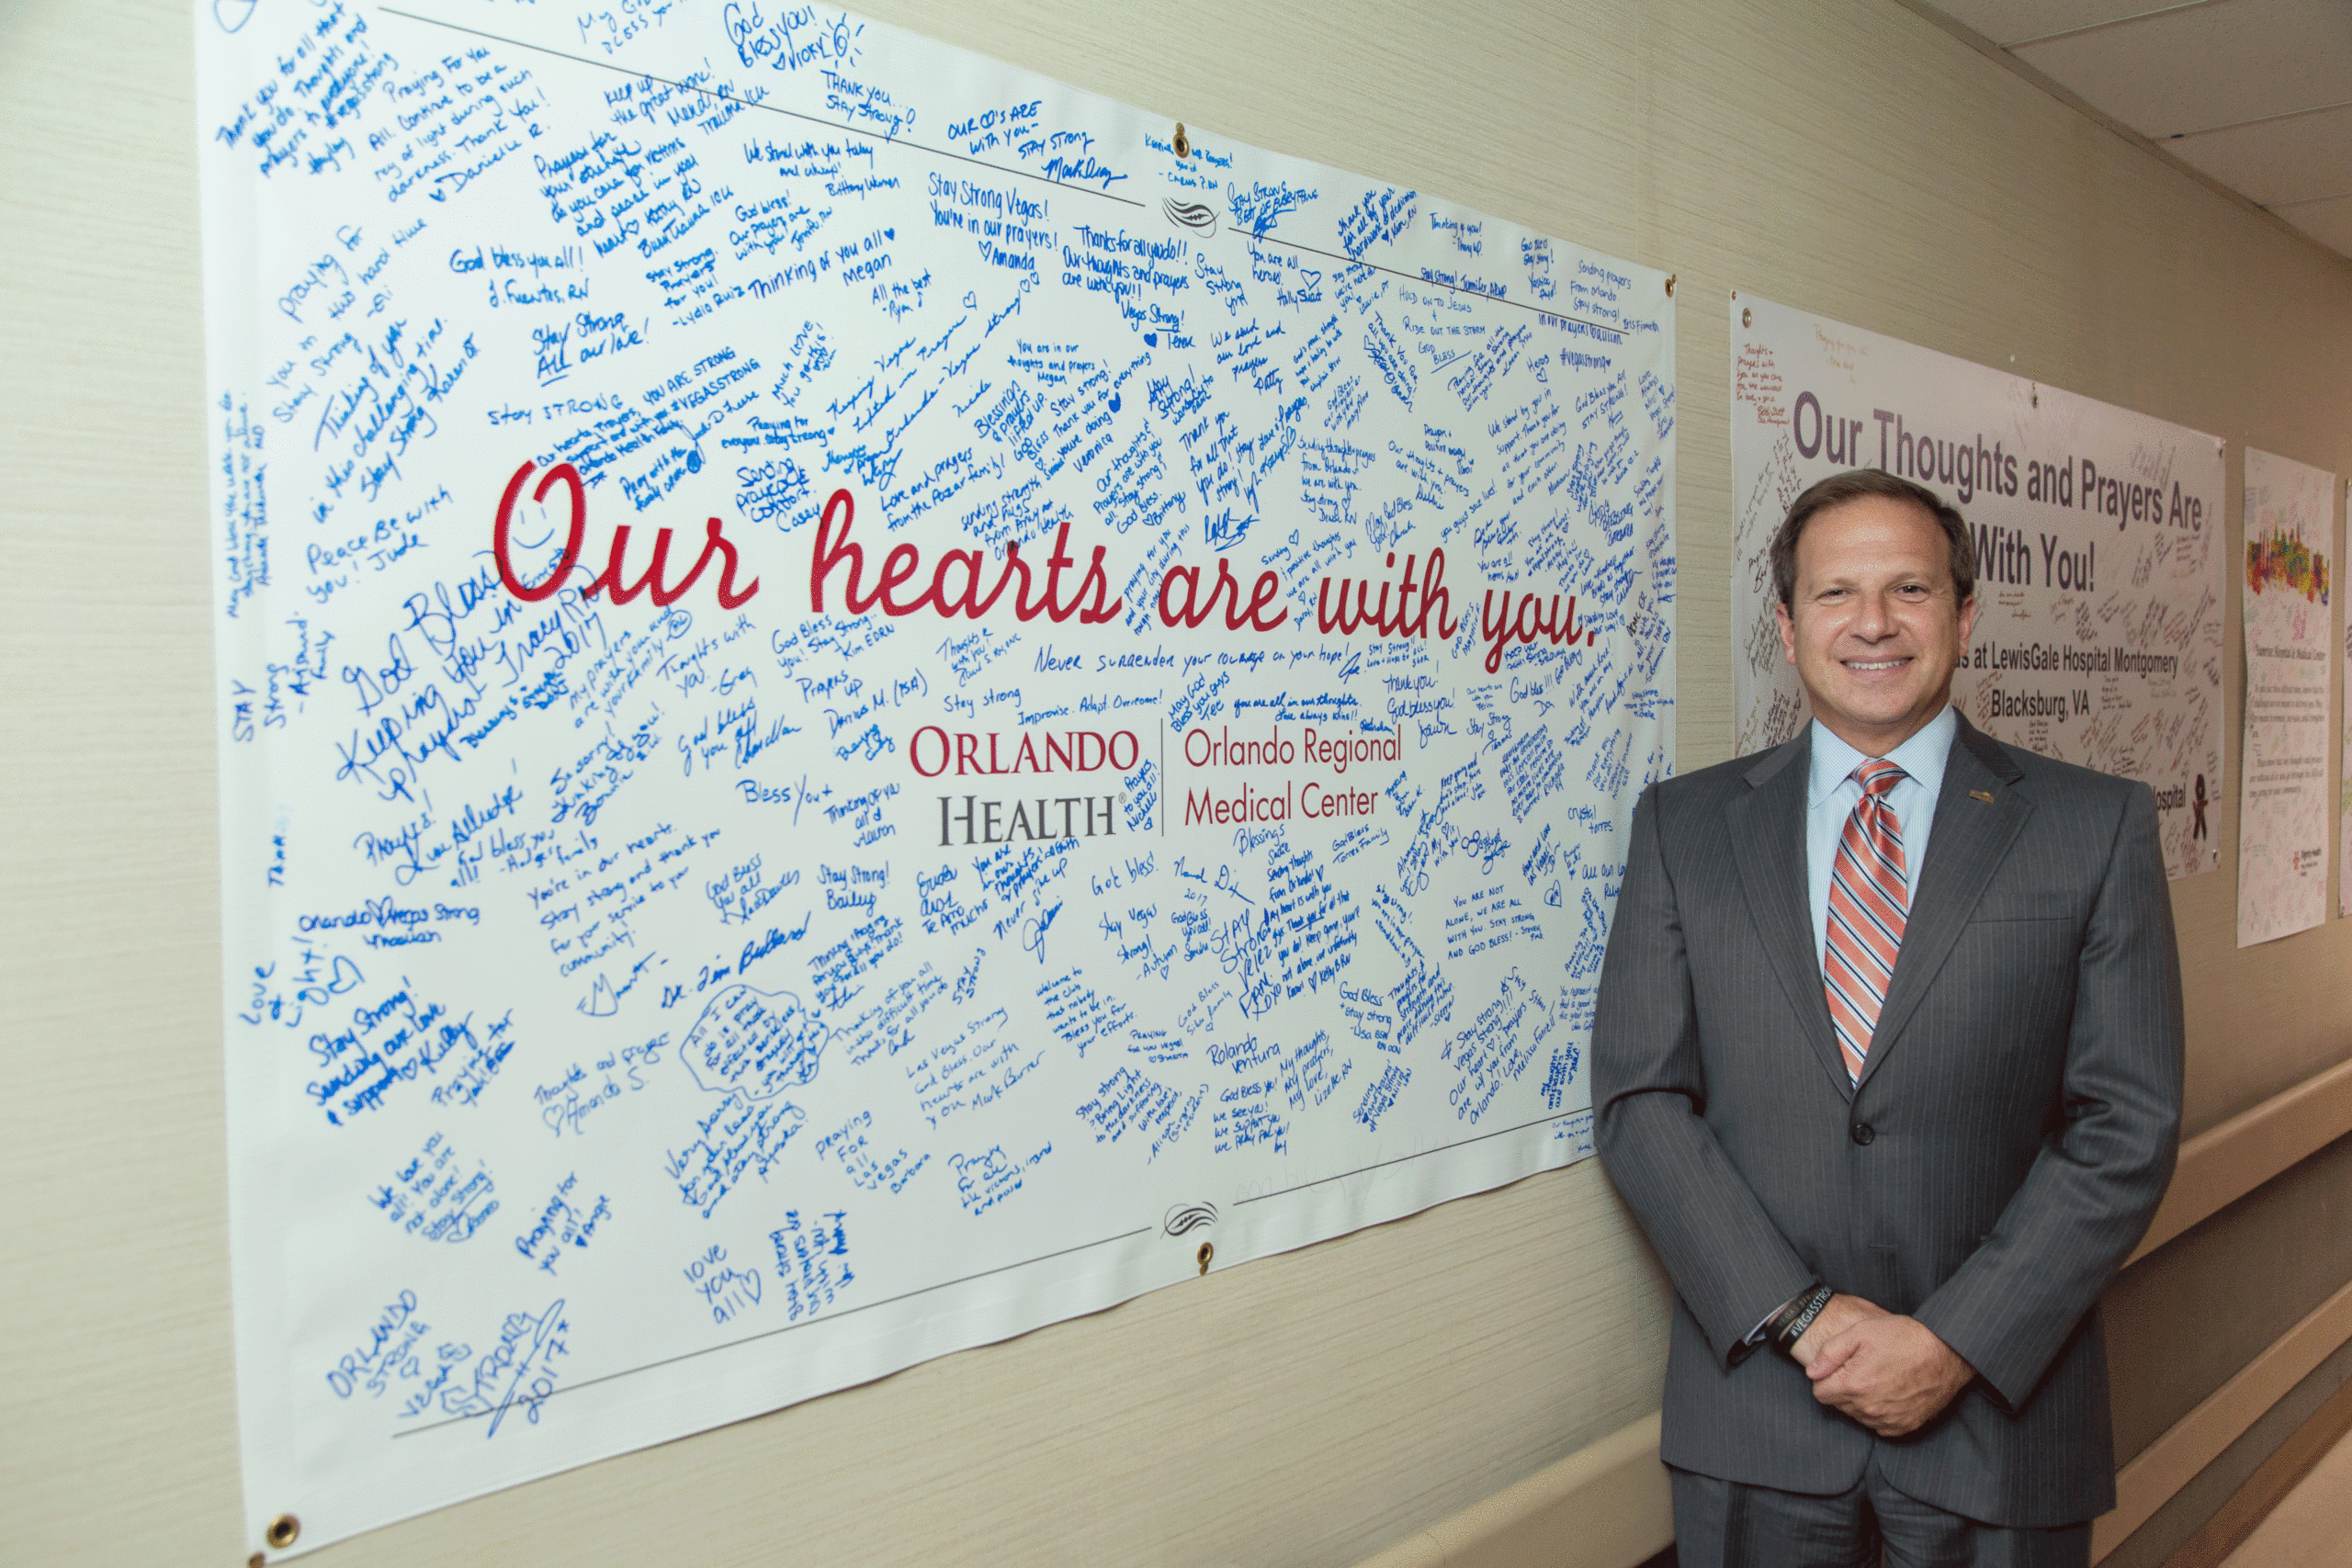 Man wearing suit and tie standing next to a poster filled with signatures that says Our Hearts Are With You and Orlando Regional Medical Center